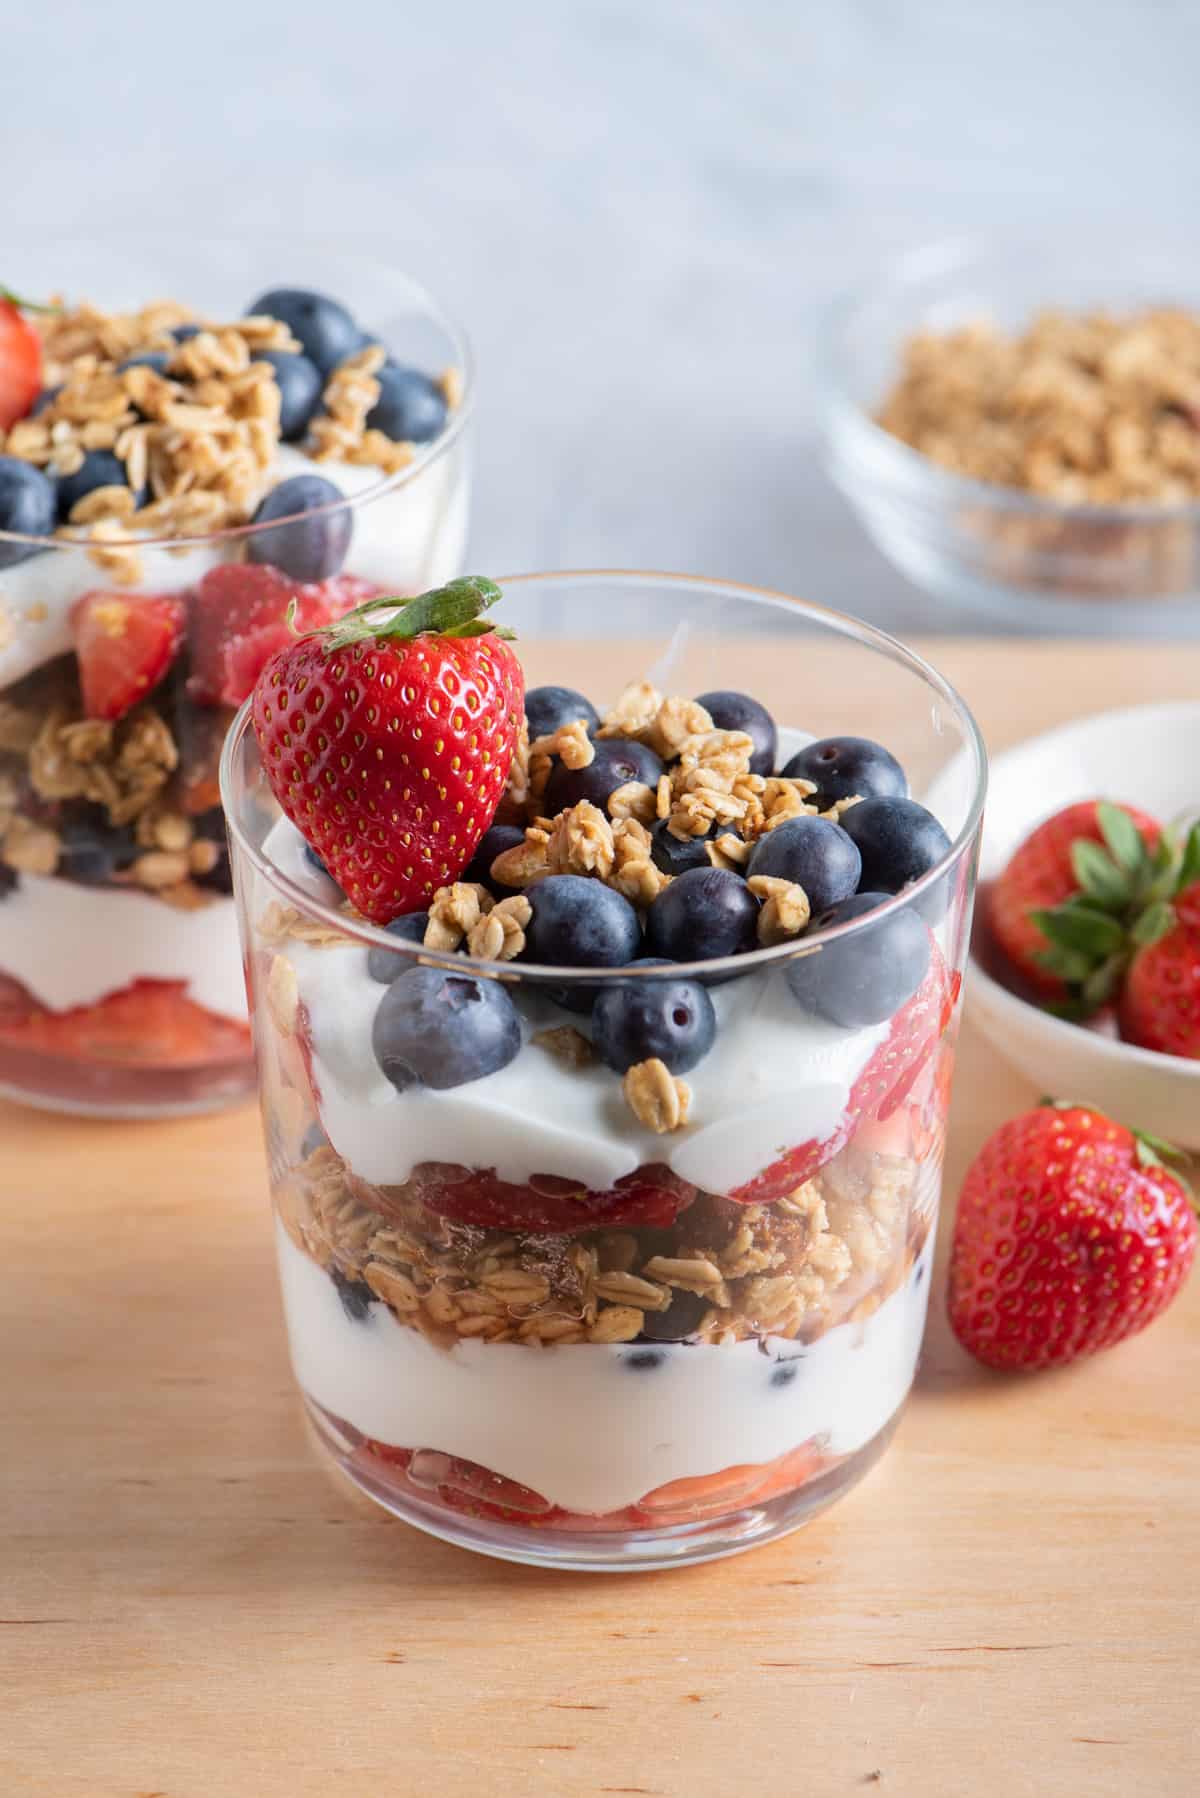 Fruit and yogurt parfait with red, white and blue fruits layered